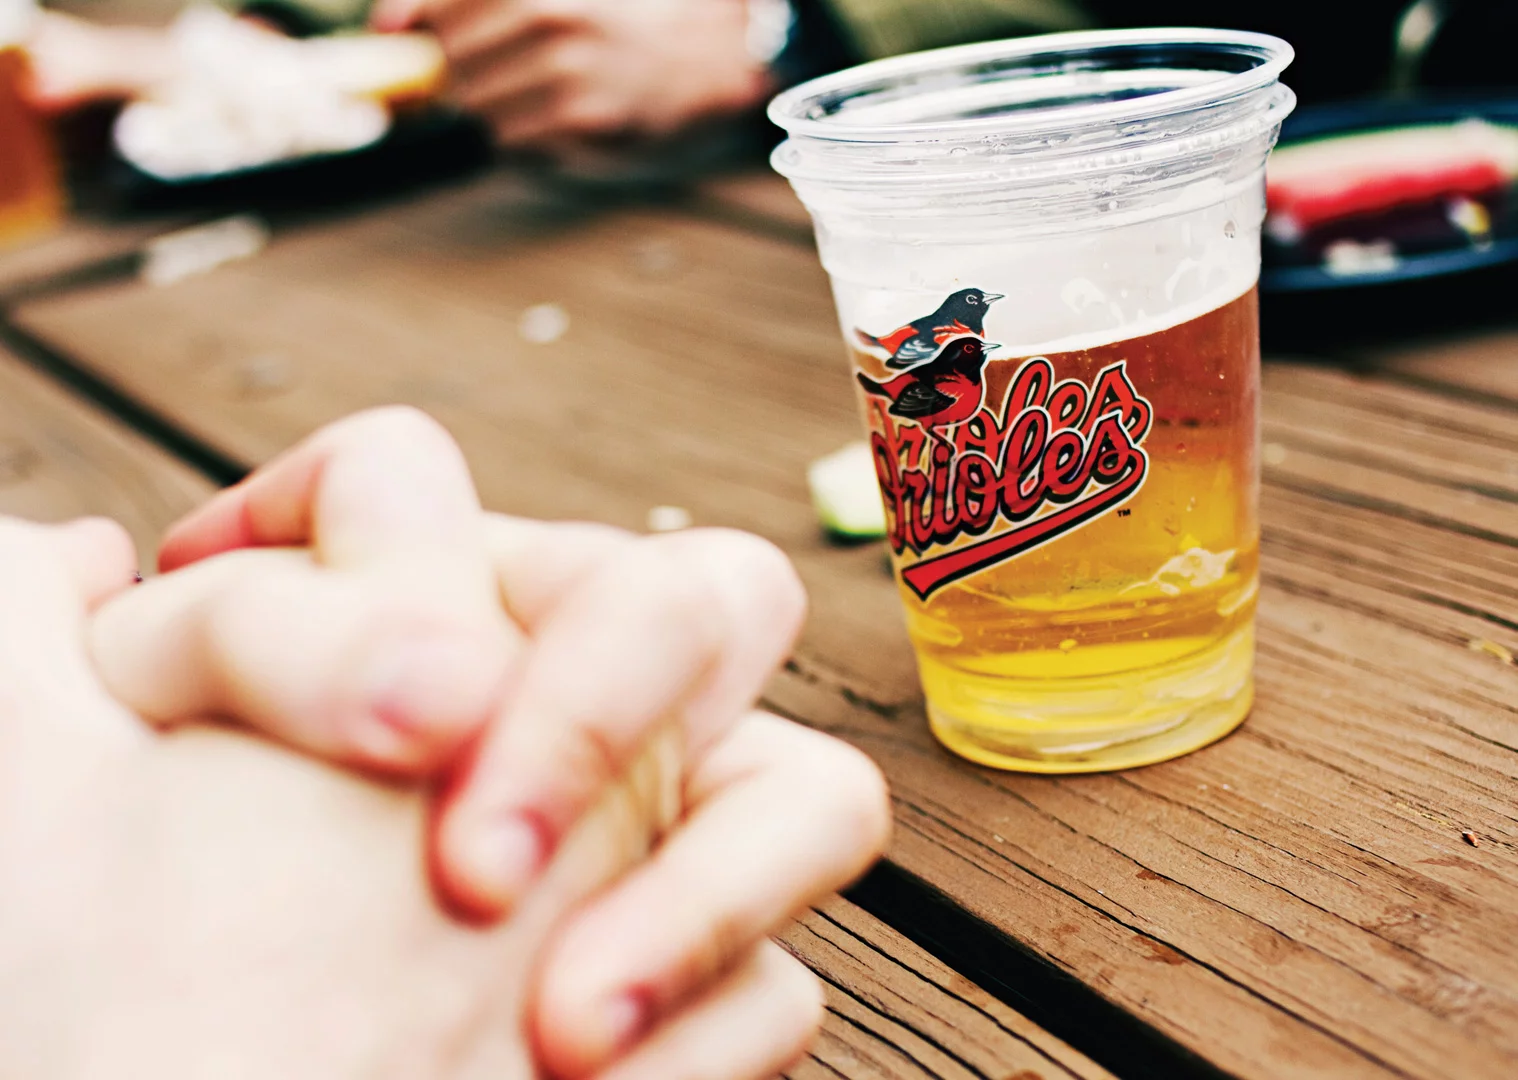 Hands clasped at a table with beer at Camden Yards.